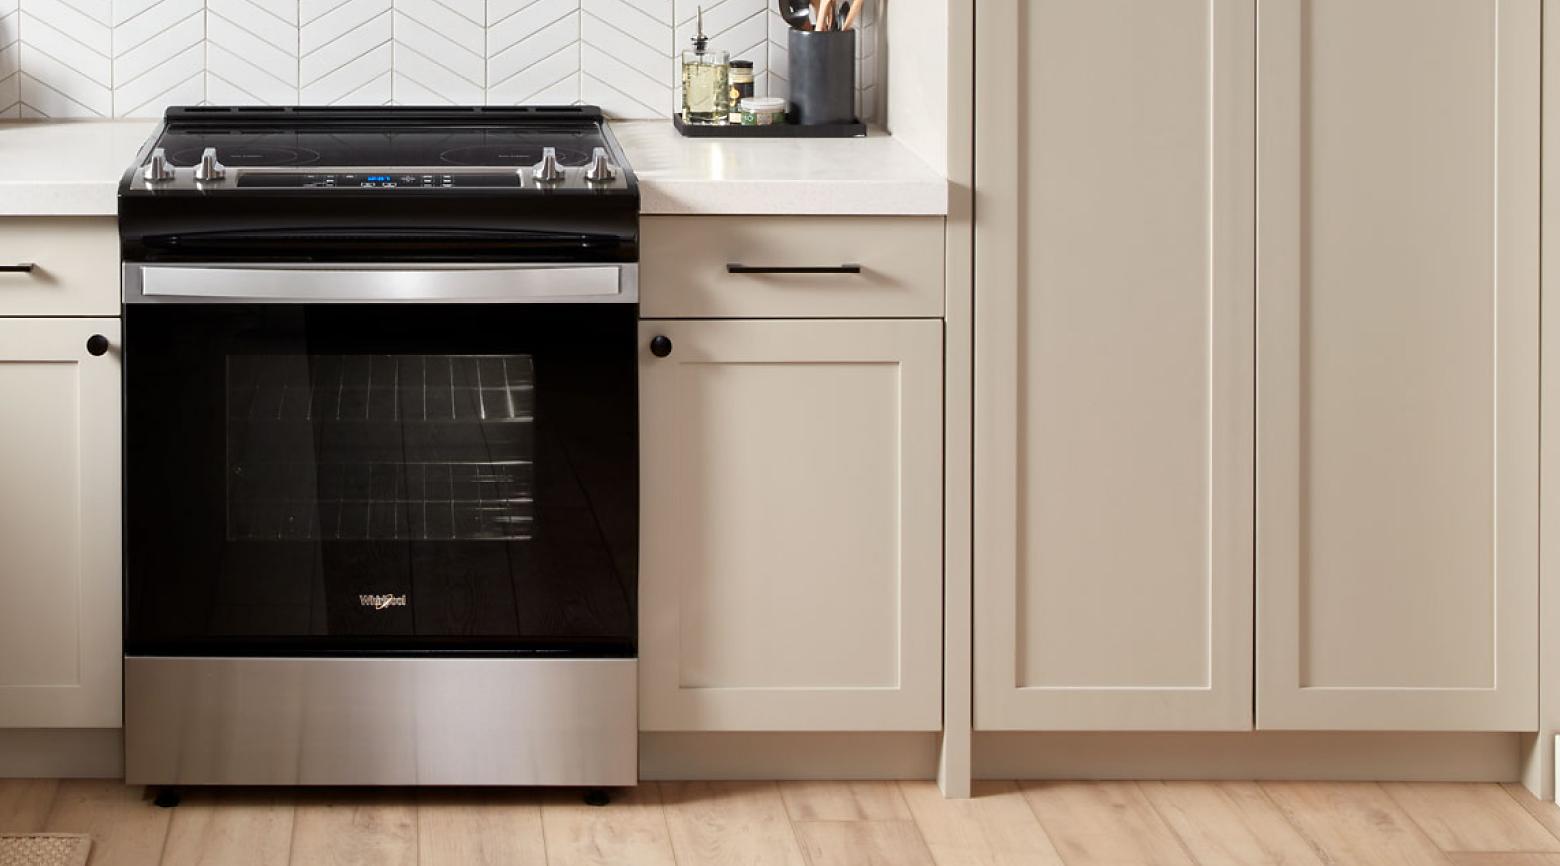 https://kitchenaid-h.assetsadobe.com/is/image/content/dam/business-unit/whirlpoolv2/en-us/marketing-content/site-assets/page-content/blog/kitchen-articles/how-to-steam-clean-your-oven/how-to-steam-clean-your-oven_21.jpg?fmt=png-alpha&qlt=85,0&resMode=sharp2&op_usm=1.75,0.3,2,0&scl=1&constrain=fit,1